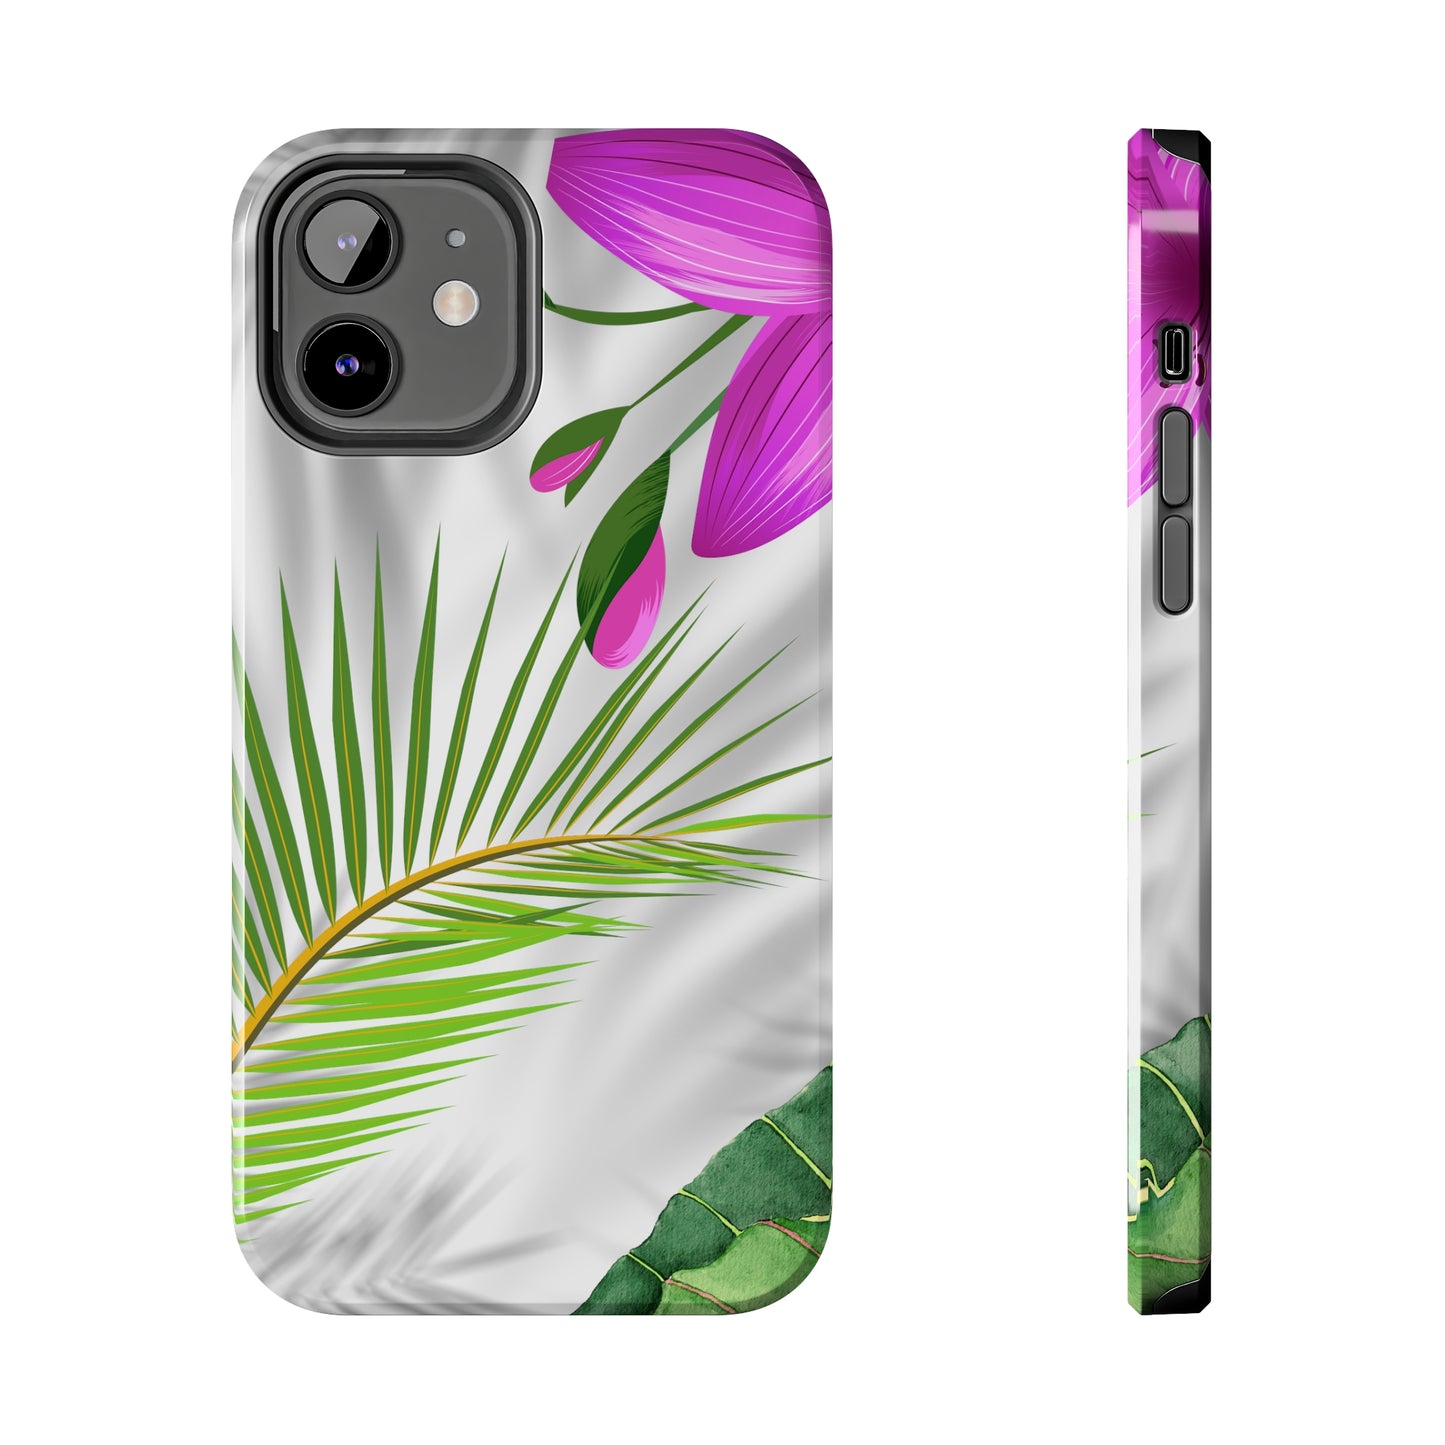 Orchid Flowers Custom Printed iPhone case by TheGlassyLass.com